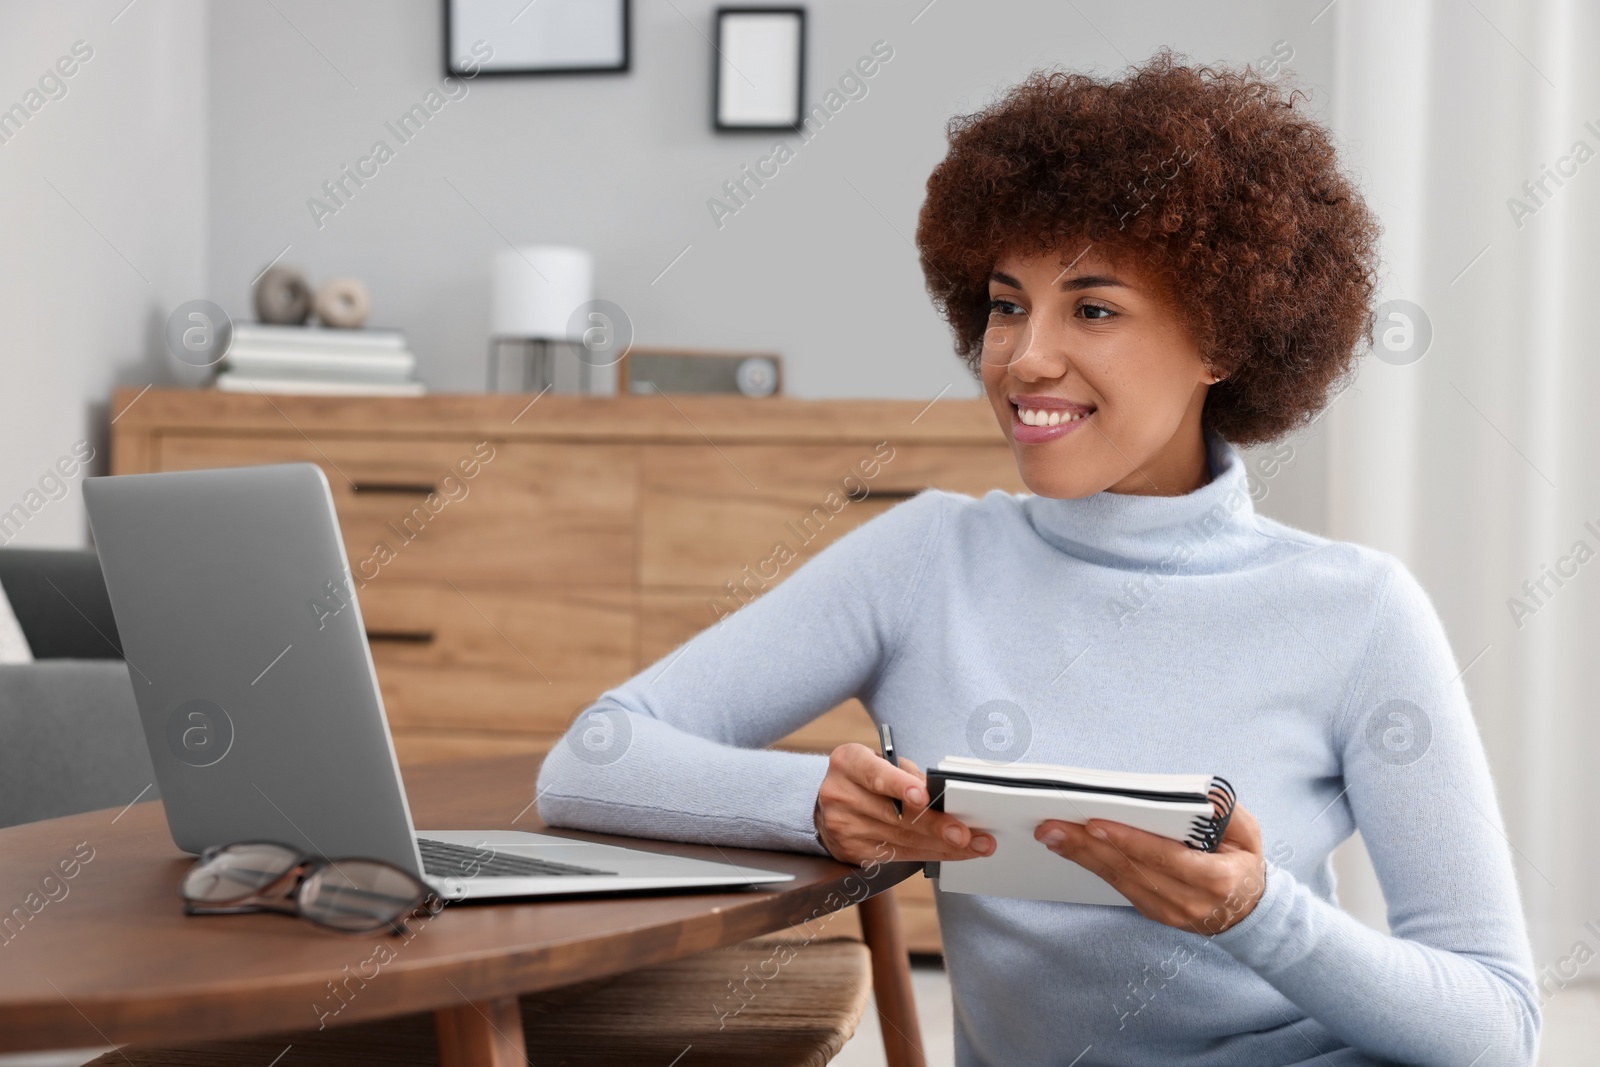 Photo of Beautiful young woman using laptop and writing in notebook at wooden coffee table in room